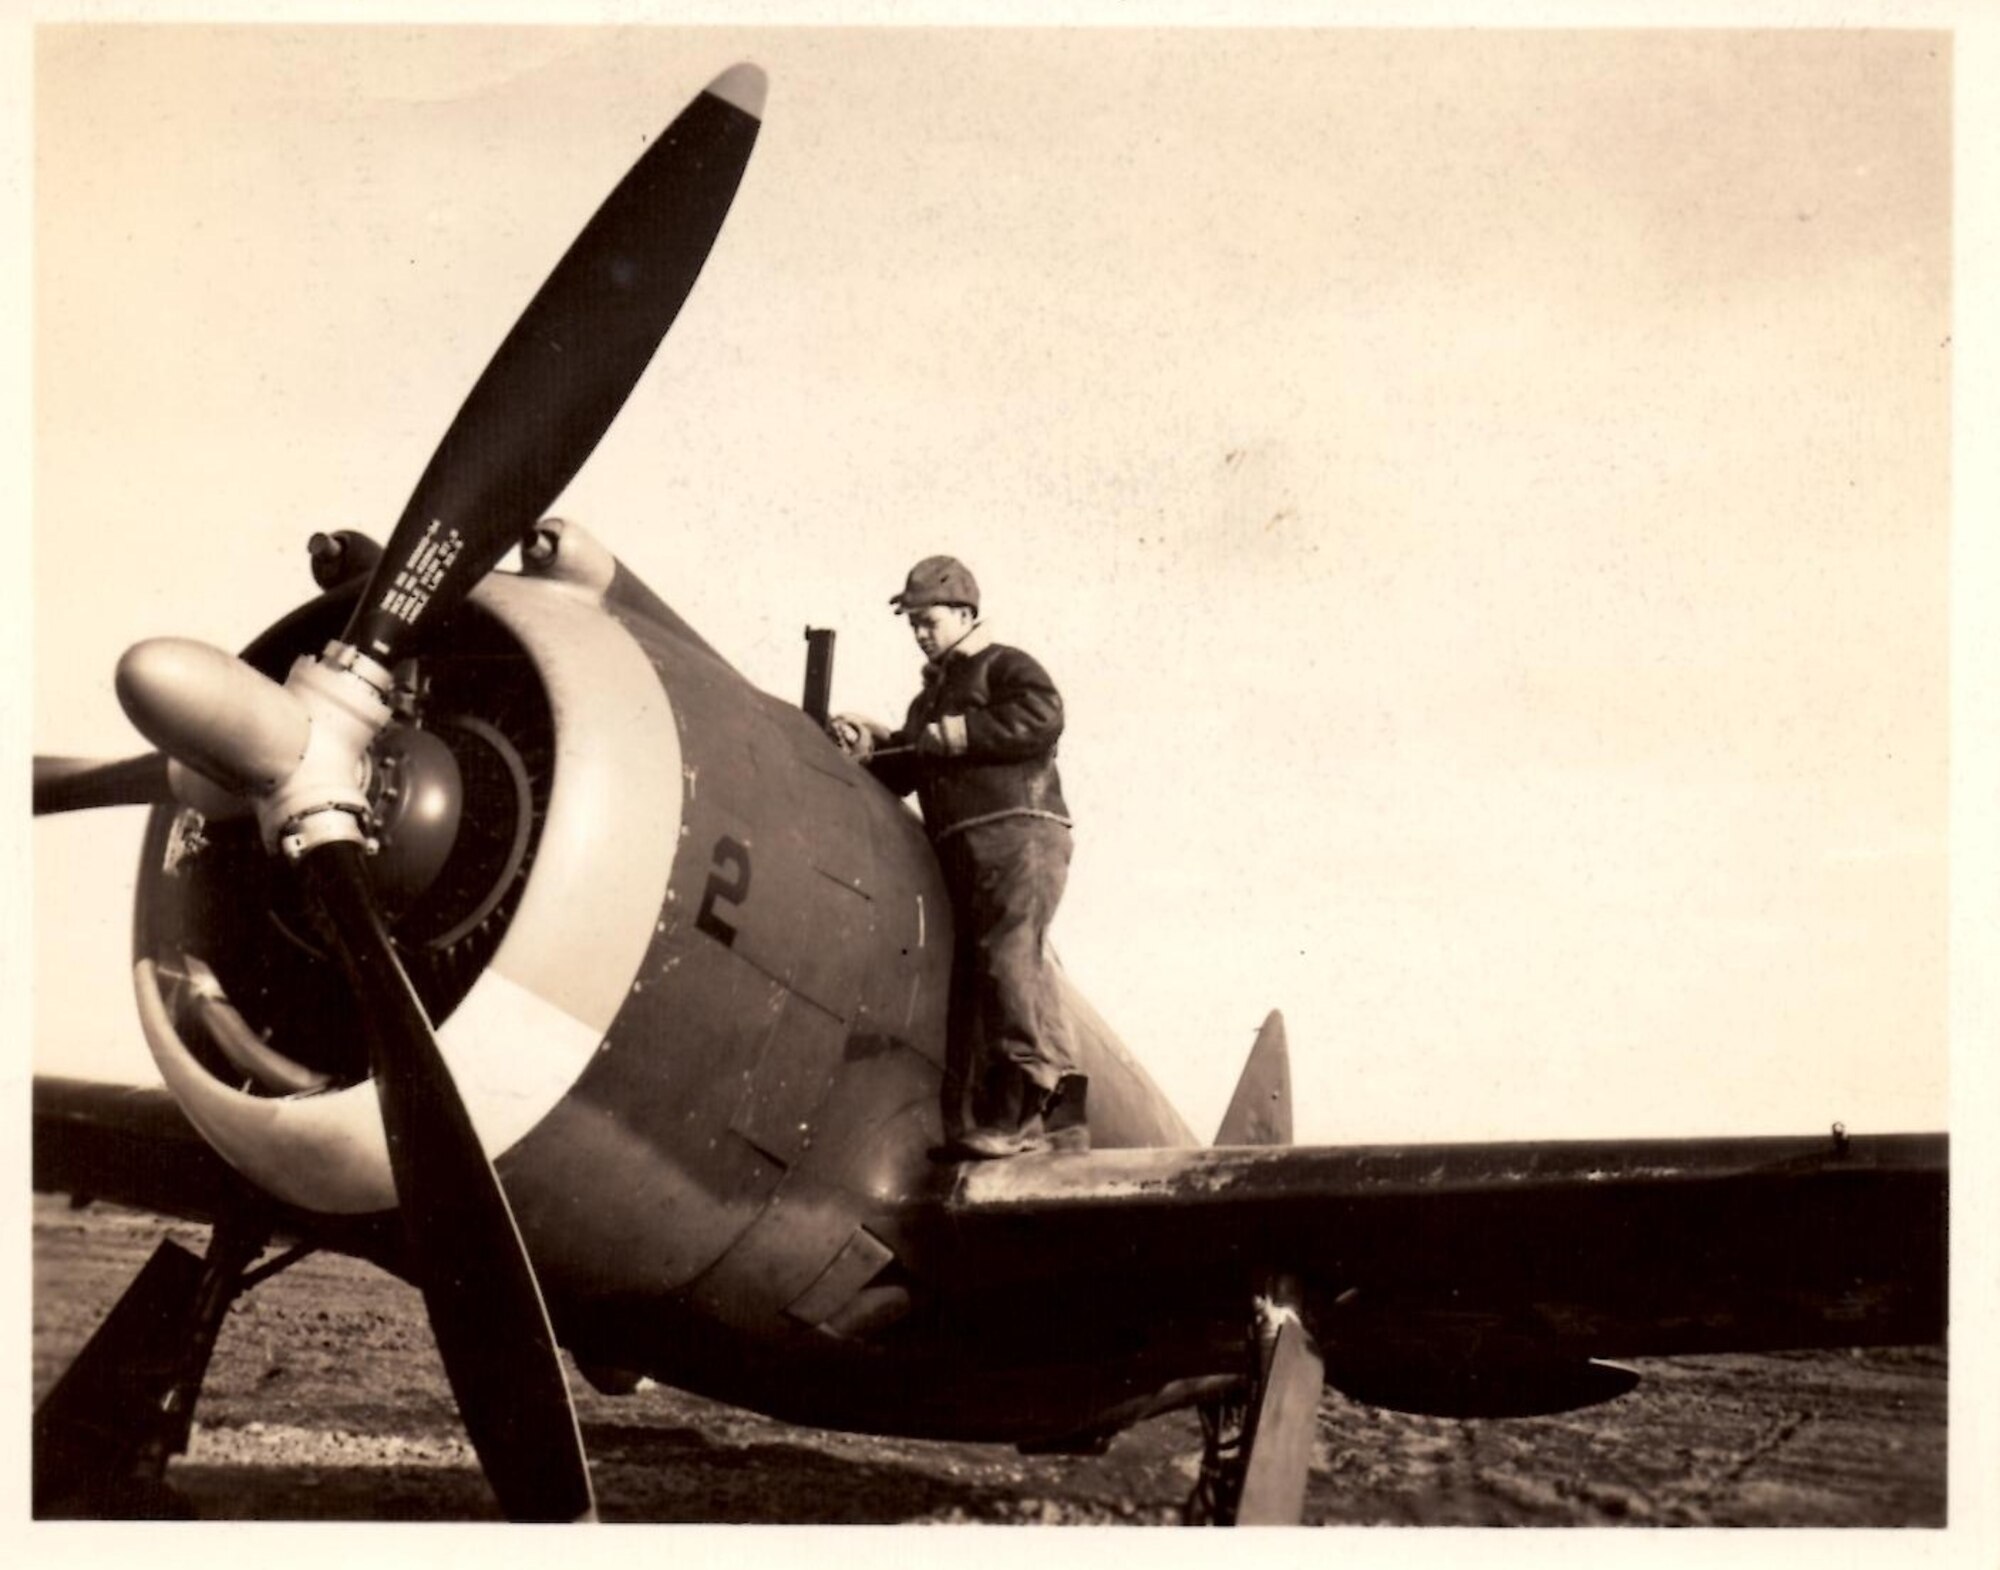 Republic P-43 Lancer of the 55th Pursuit Group being serviced at Portland AAB in this undated photograph.  The enlisted man servicing the aircraft may be an armorer working on the .50 caliber machine gun.  Note the multi-colored leading edge of the engine cowling and the low number “2” on the cowling, suggesting a ship flown by a pilot on group staff with colors representing the three assigned pursuit squadrons.  (142FW History Archives, Robert Hall Collection)